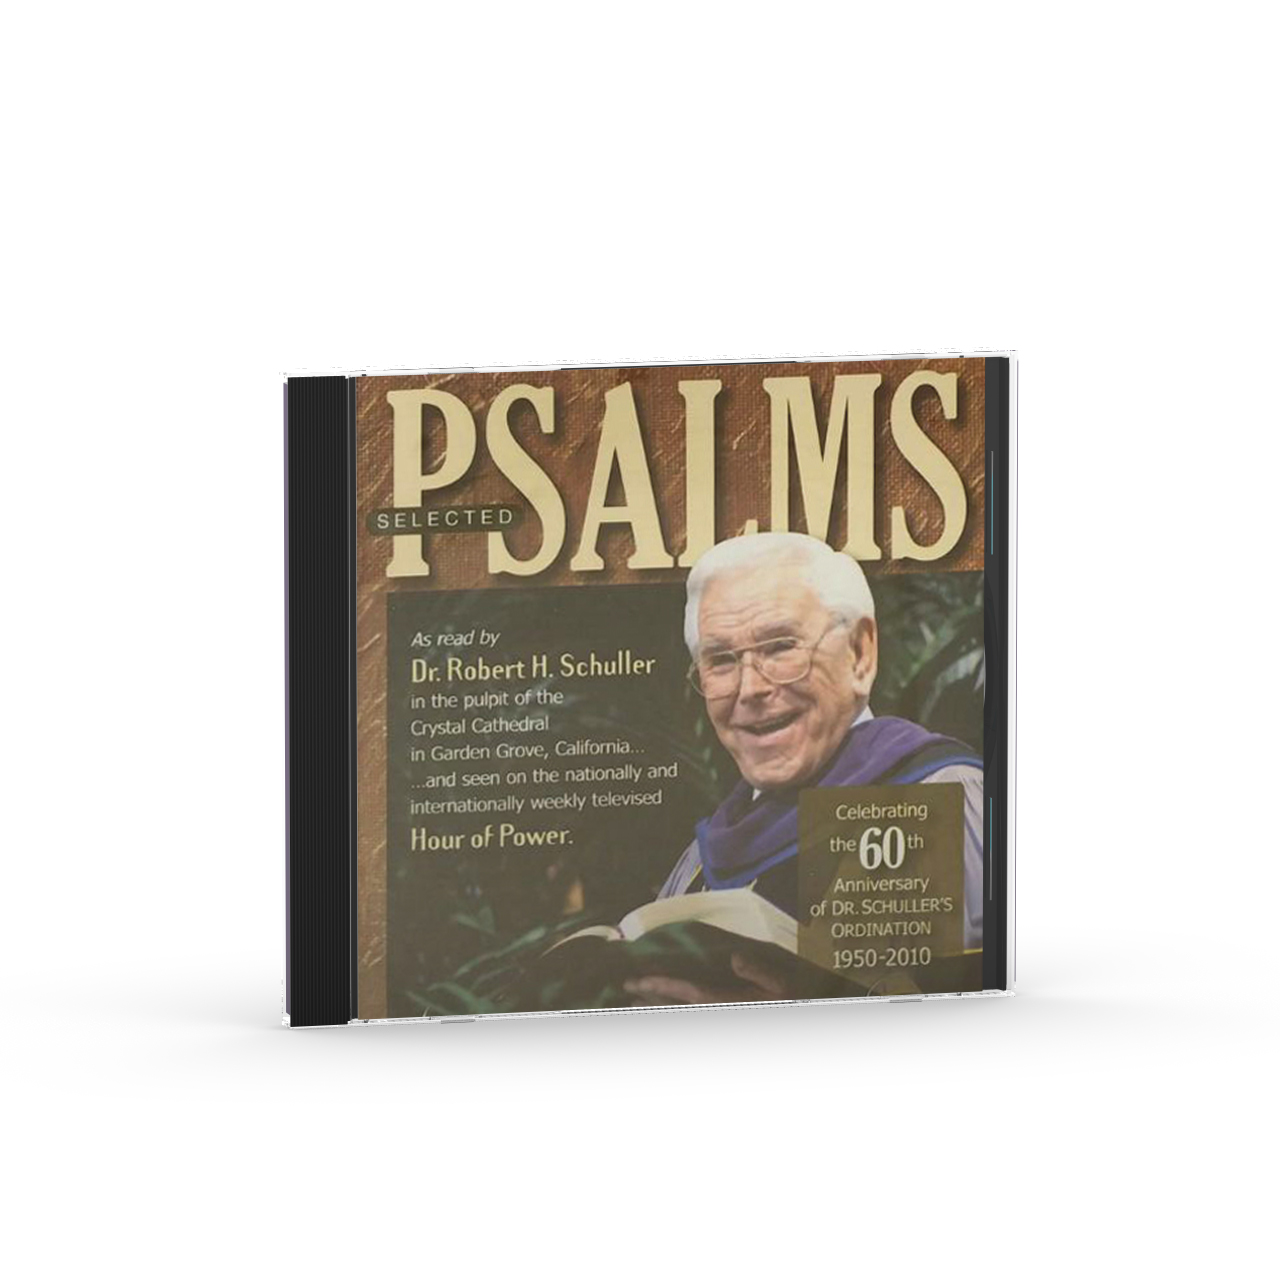 Selected Psalms